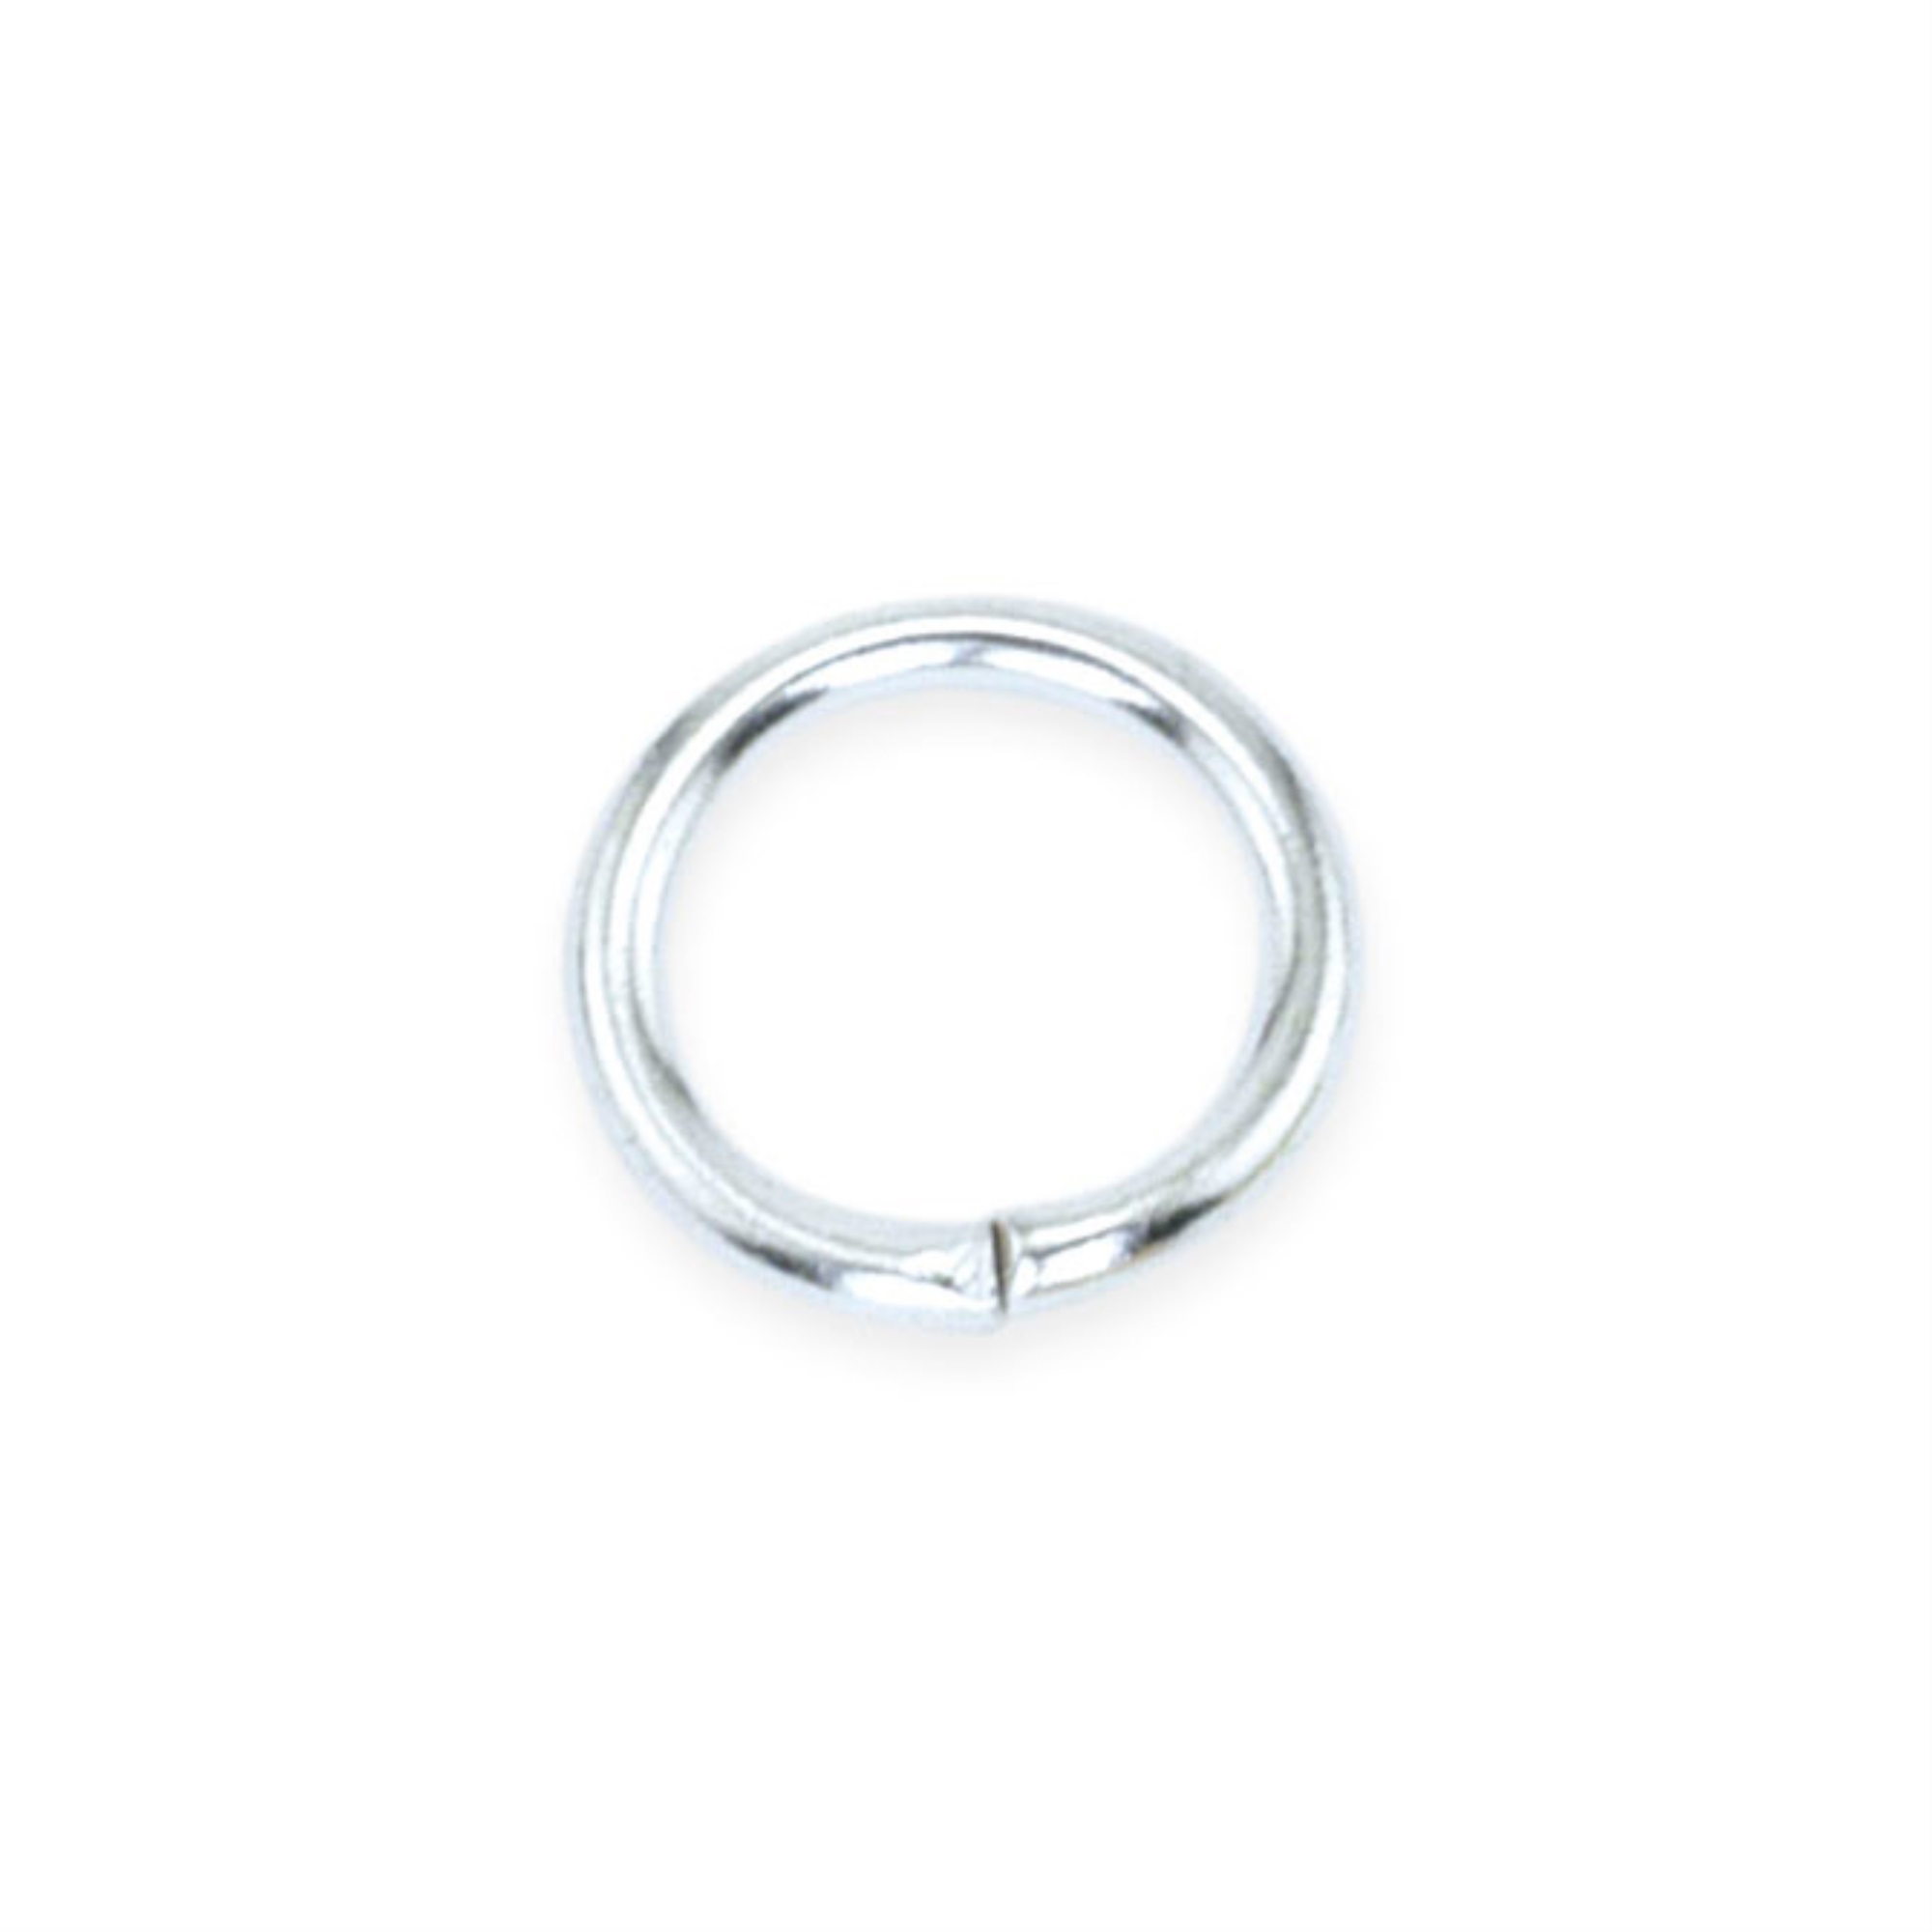 Beadalon Jump Rings, Round, Silver-Plated, 6mm, 50/Pkg. - image 1 of 1